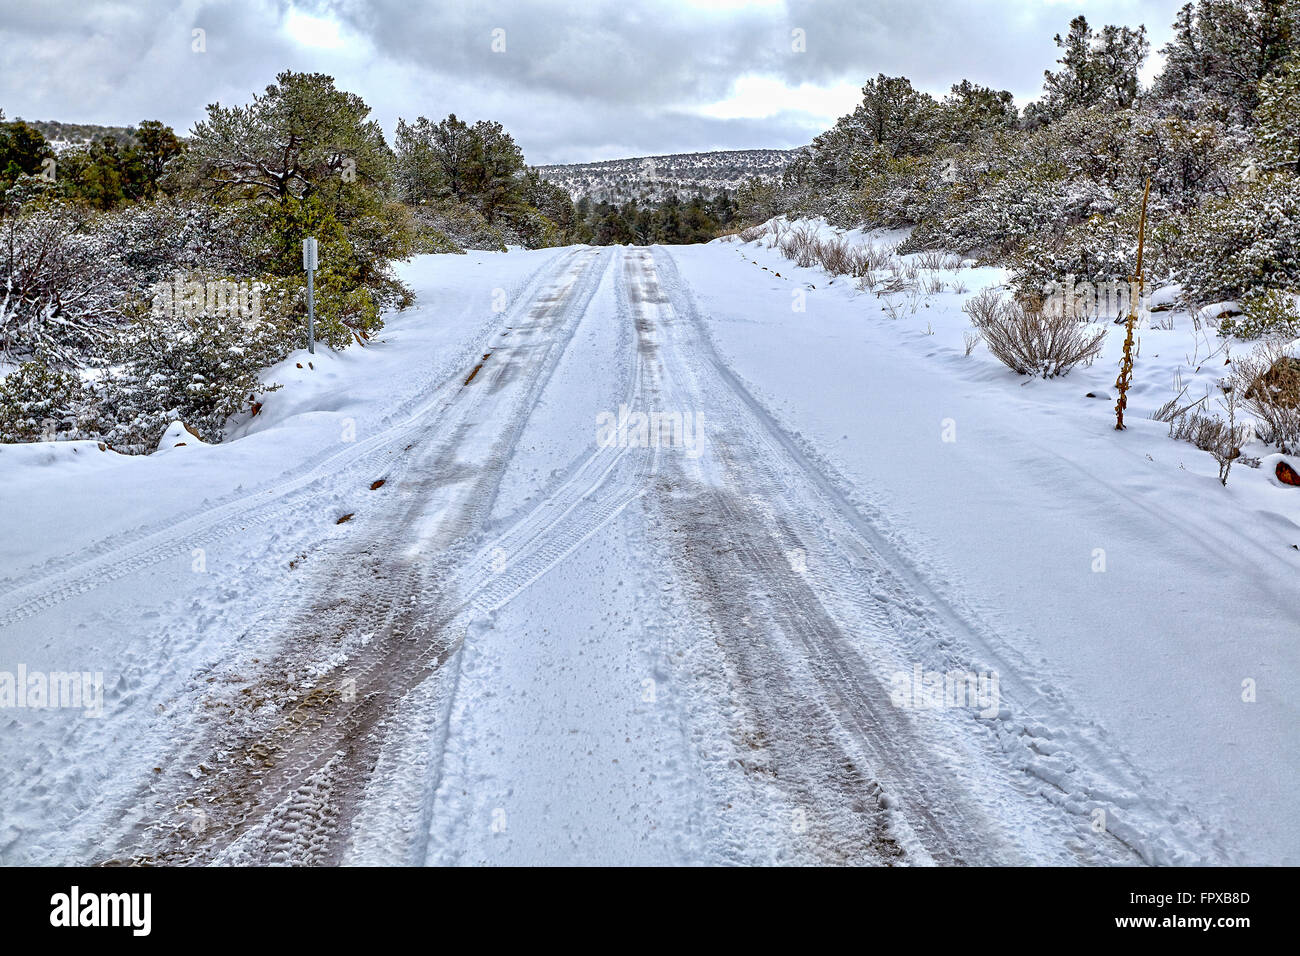 winter snow forest mountain road landscape with tire tracks Stock Photo